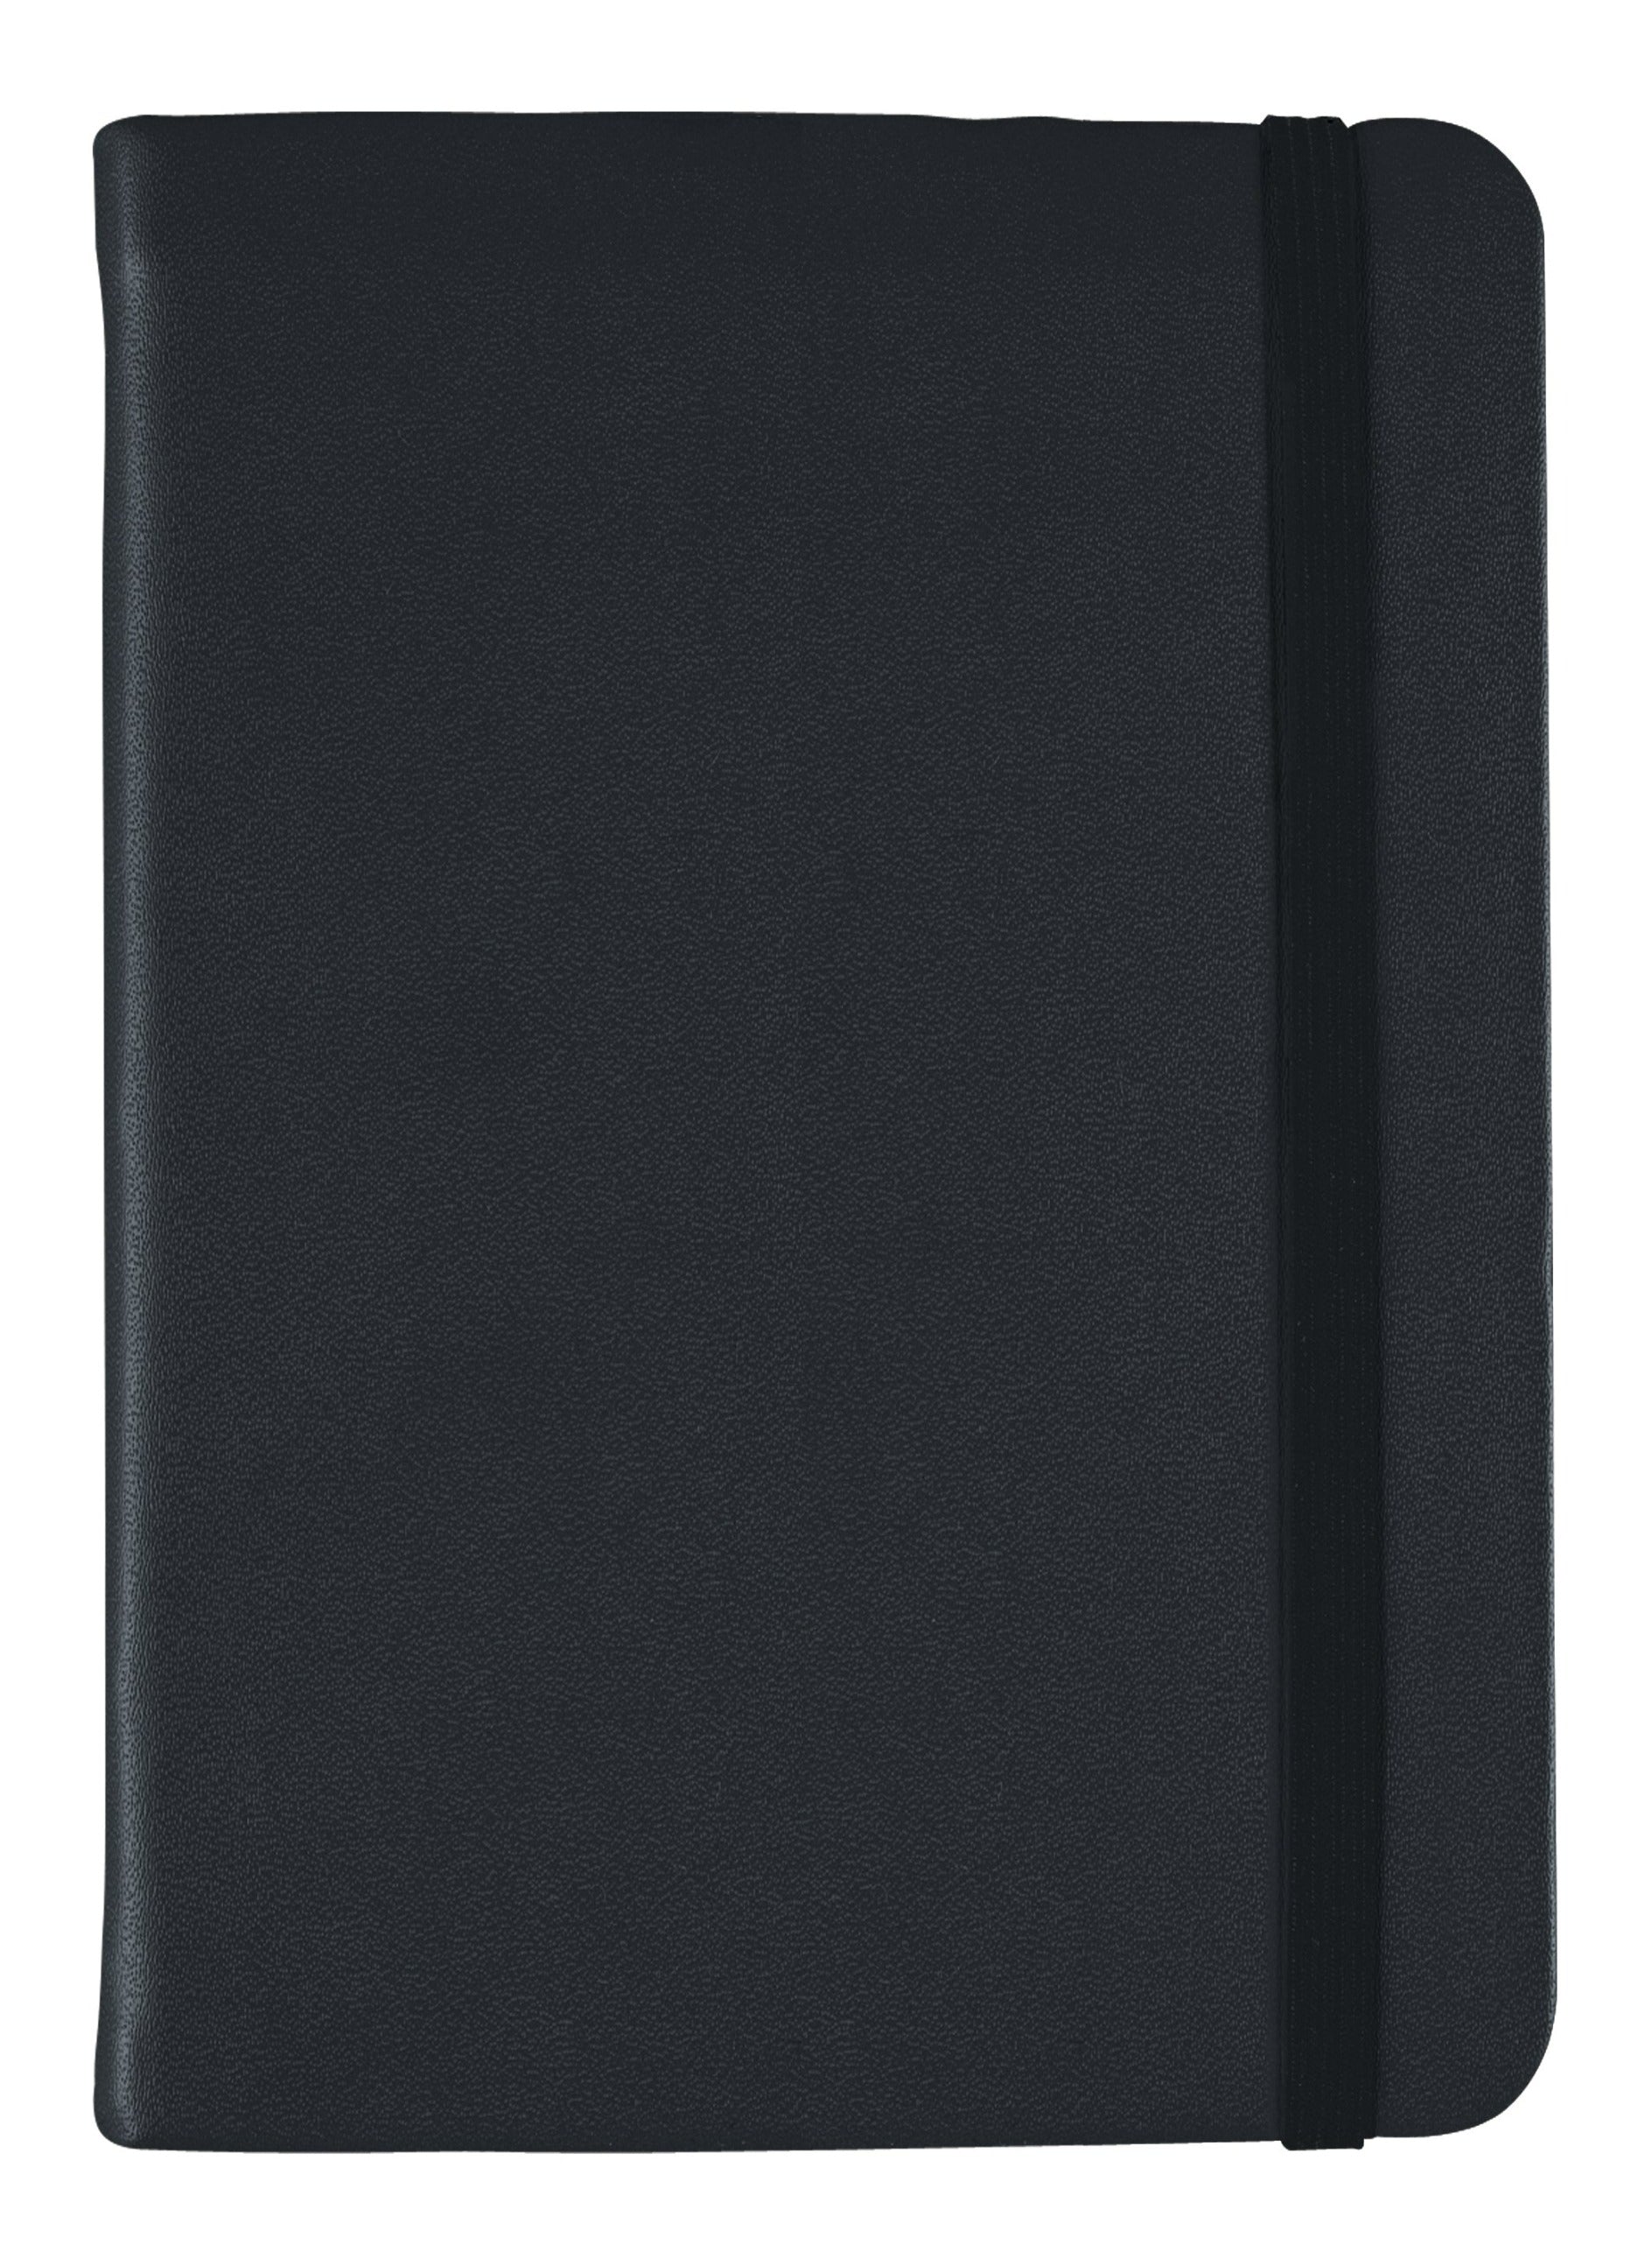 Collins Vauxhall Journal - 192 Blank Pages, Size Quarto